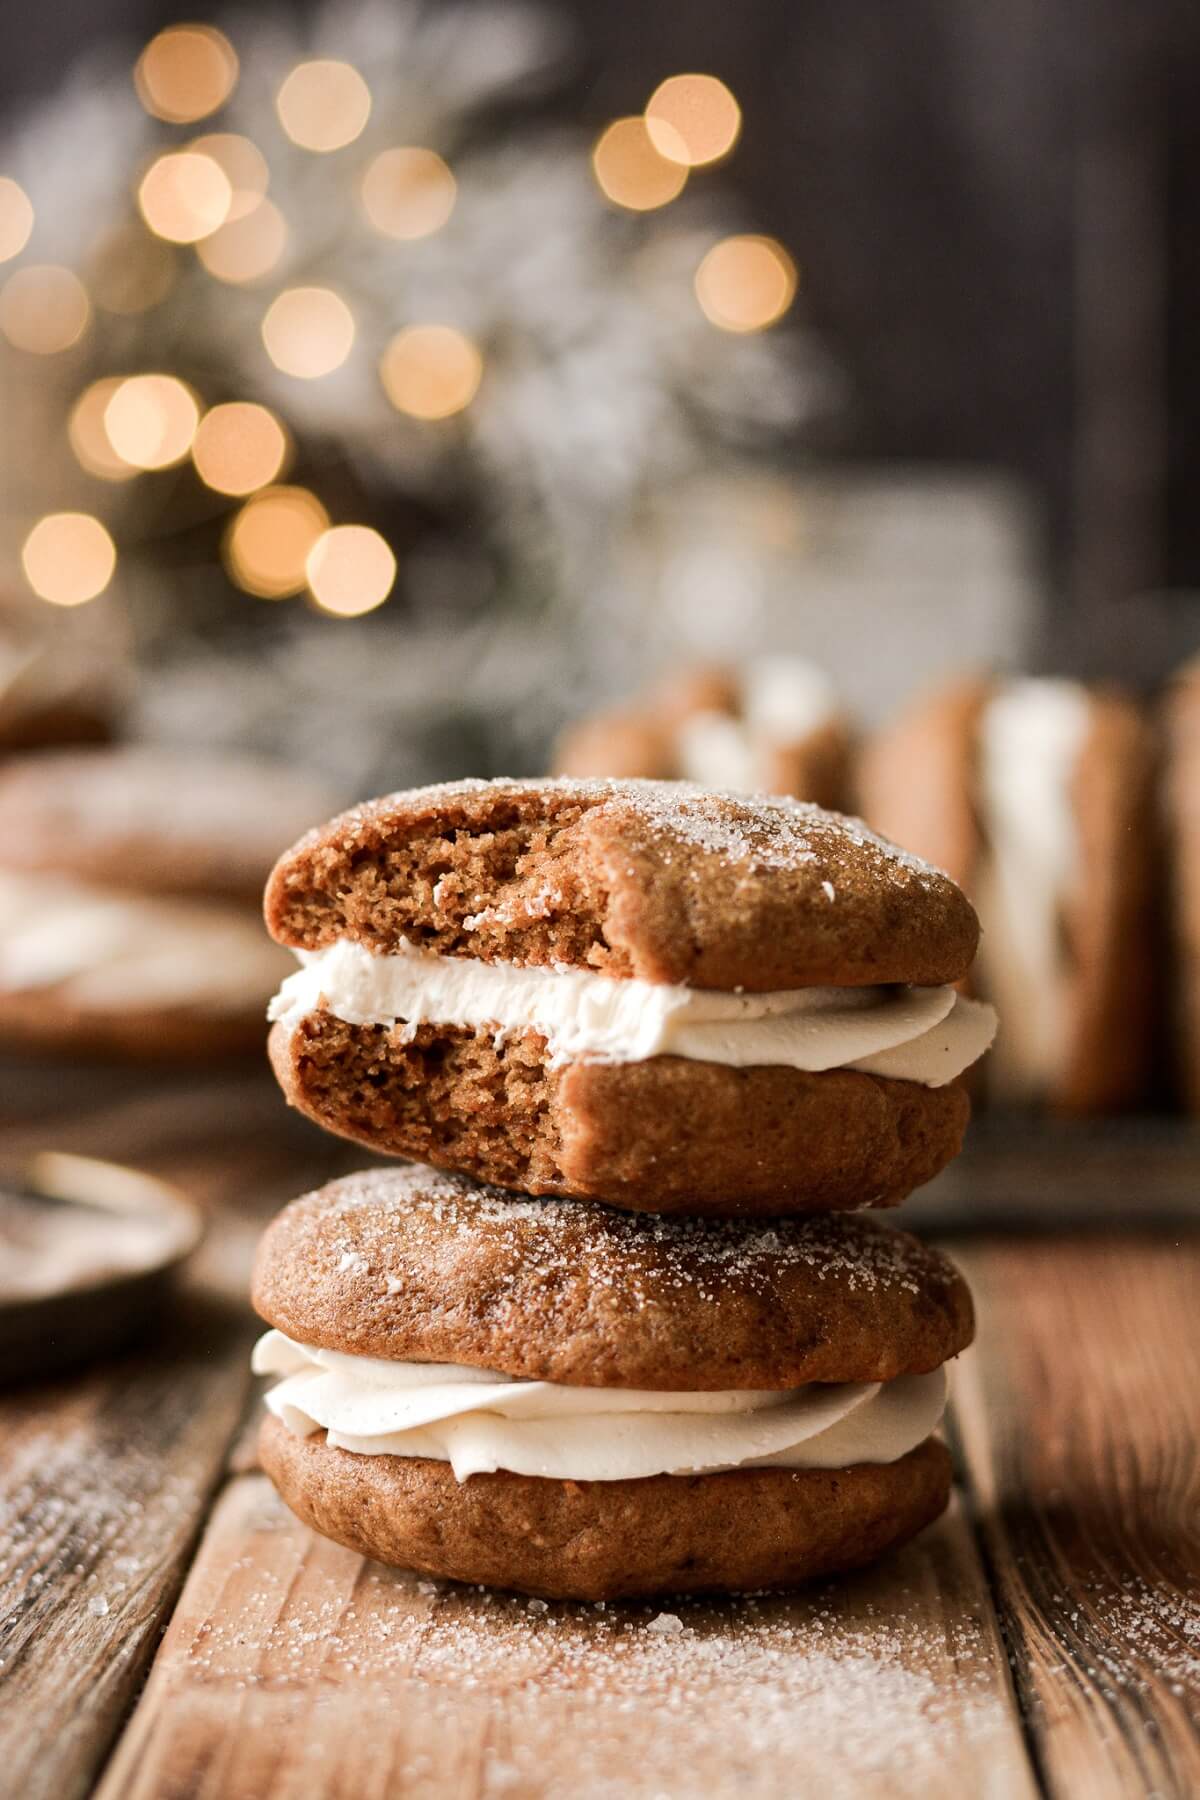 Gingerbread whoopie pie with a bite taken.